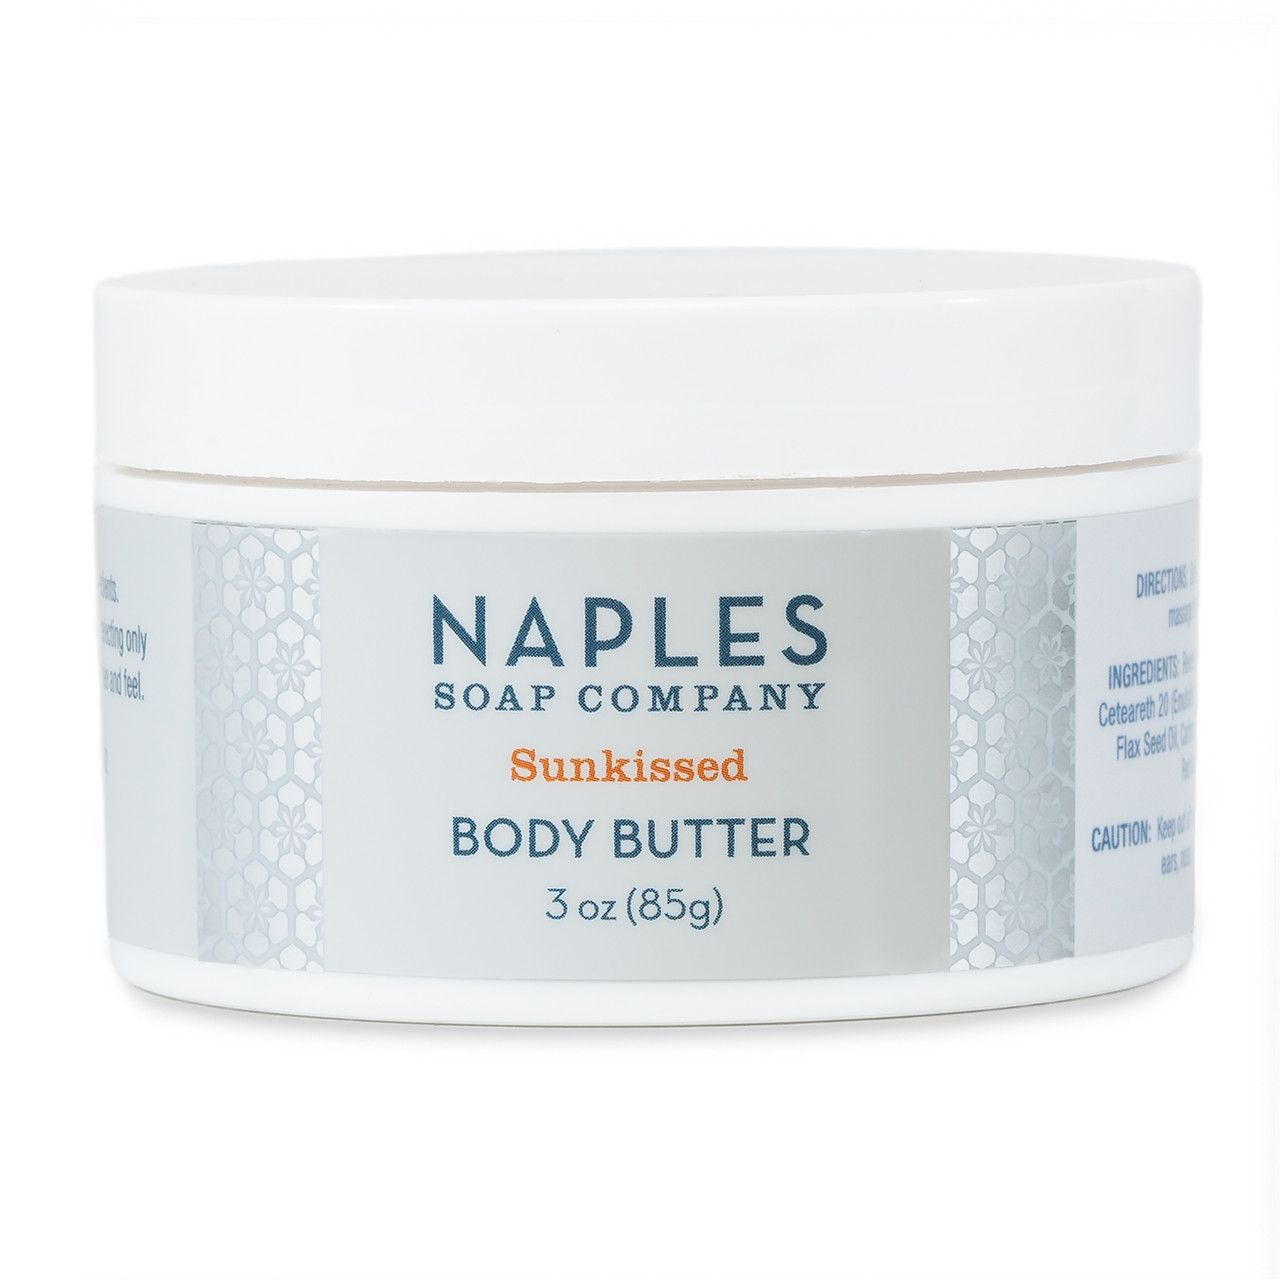 Sunkissed Body Butter 3 oz | Naples Soap Company